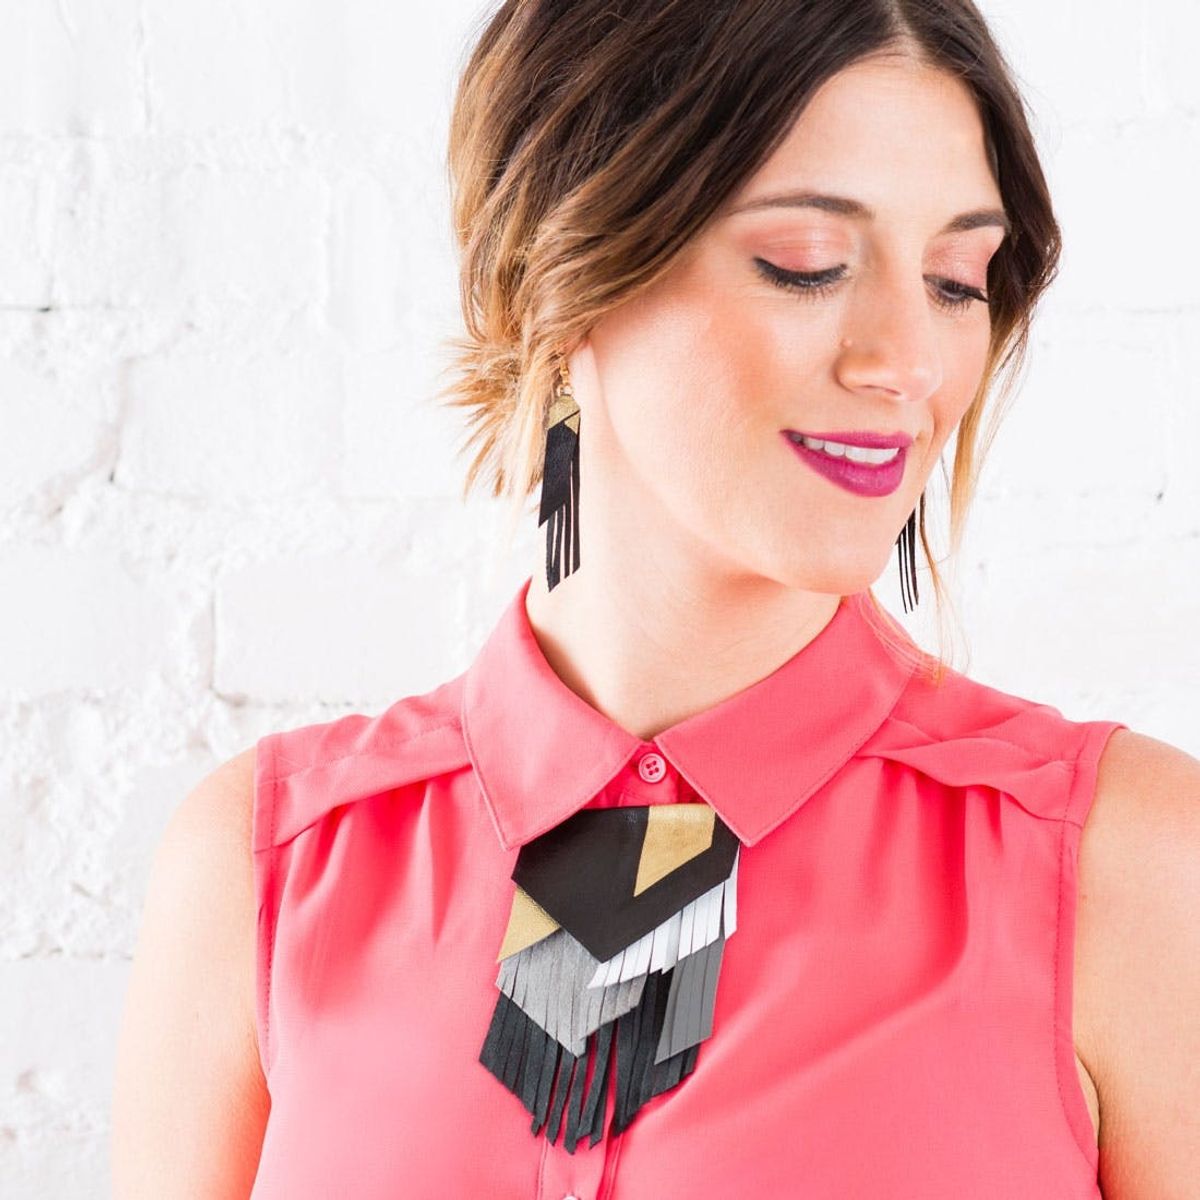 Make This DIY Leather Jewelry With Our New Kit